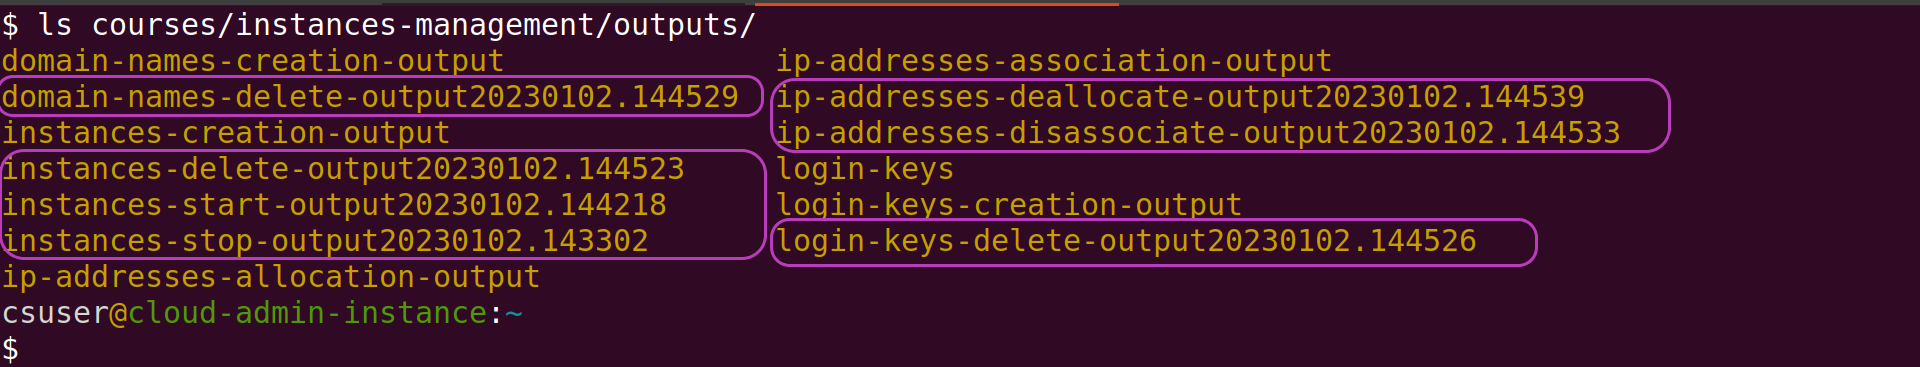 Screenshot of Linux terminal showing the output of the command "ls courses/instances-management/outputs/" after stopping, re-starting and deleting the three instances; the output shows the new directories created by the scripts that stopped, started and deleted the instances.